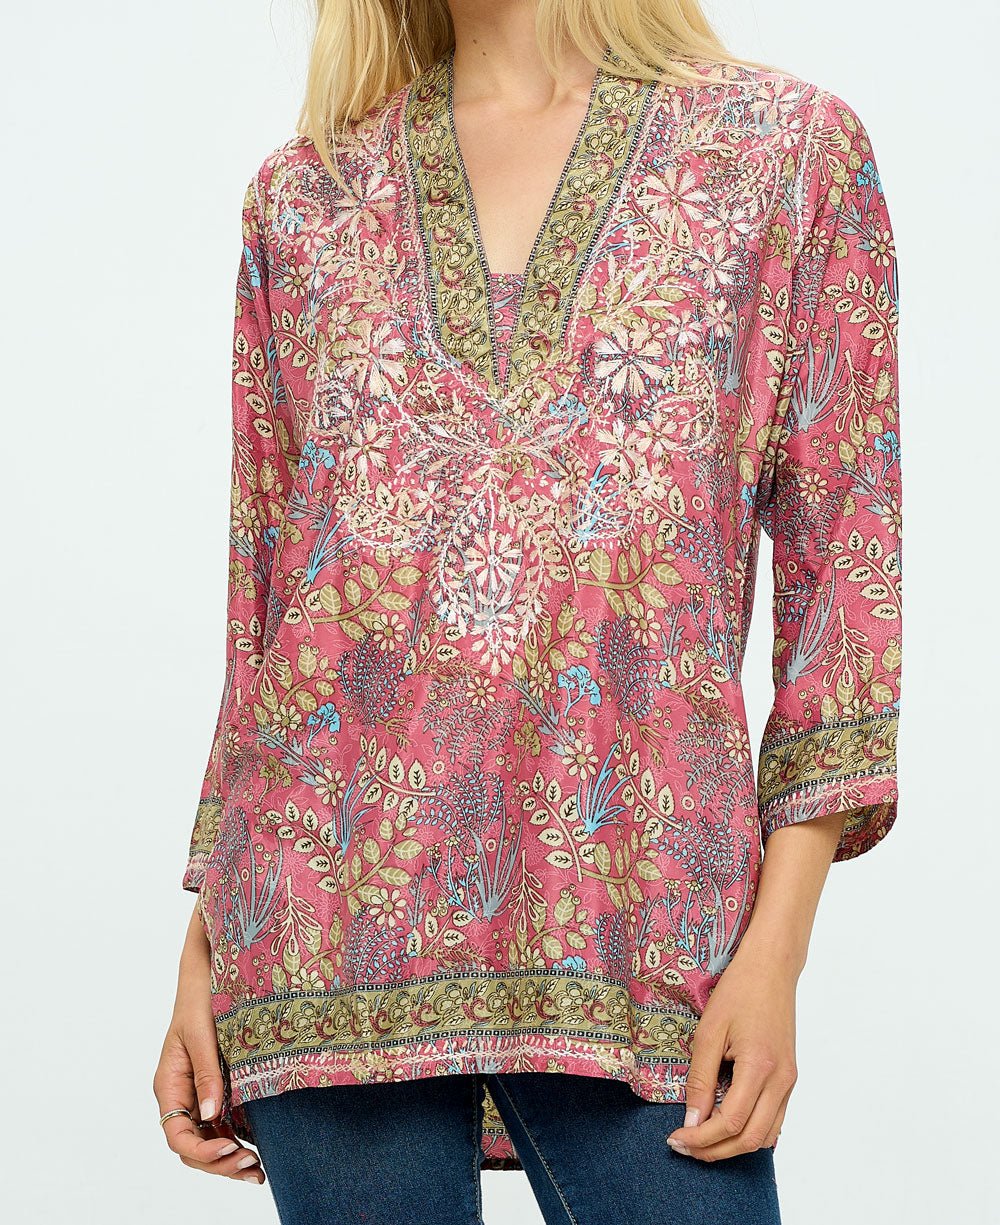 Embroidered Blush Tones V Neck Tunic Top - Shirts & Tops S